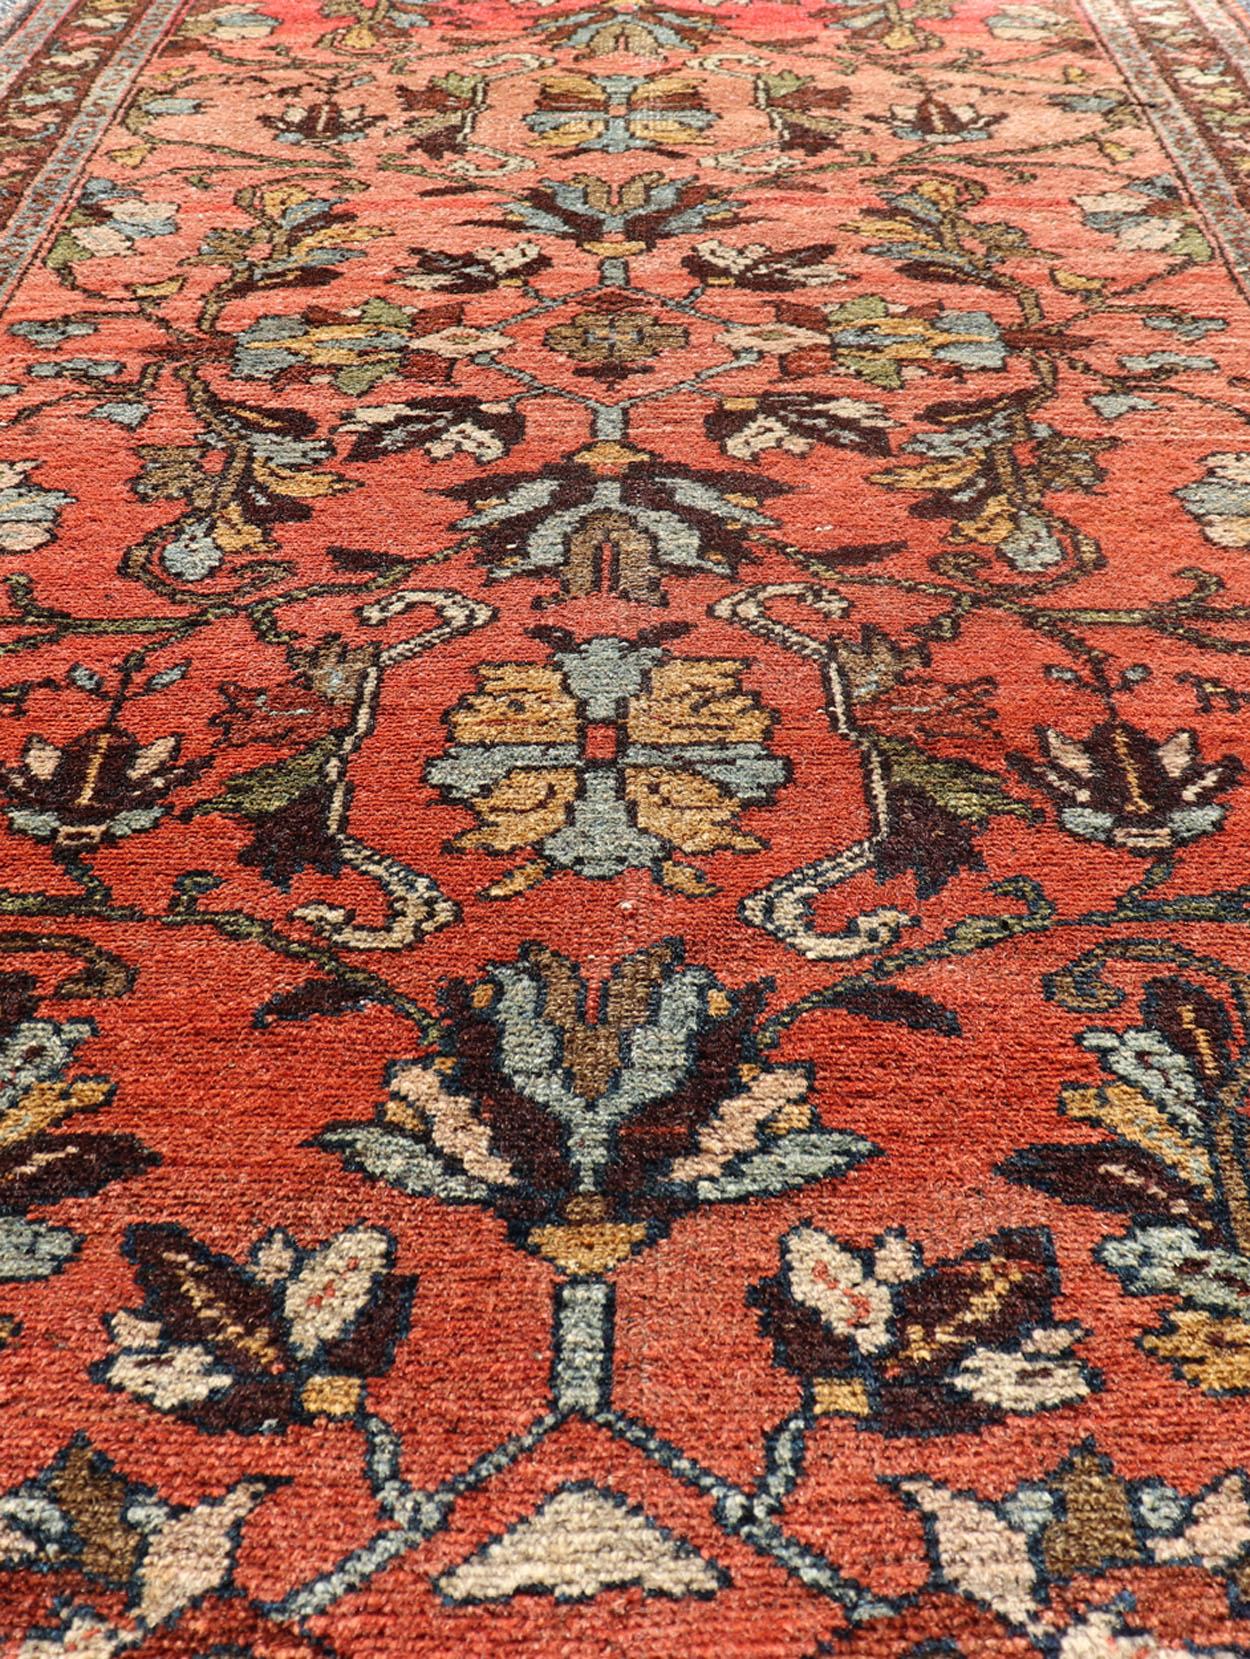 Hand-Knotted Antique Persian Hamadan Carpet with Floral Designs in Soft Orange Red and Brown For Sale